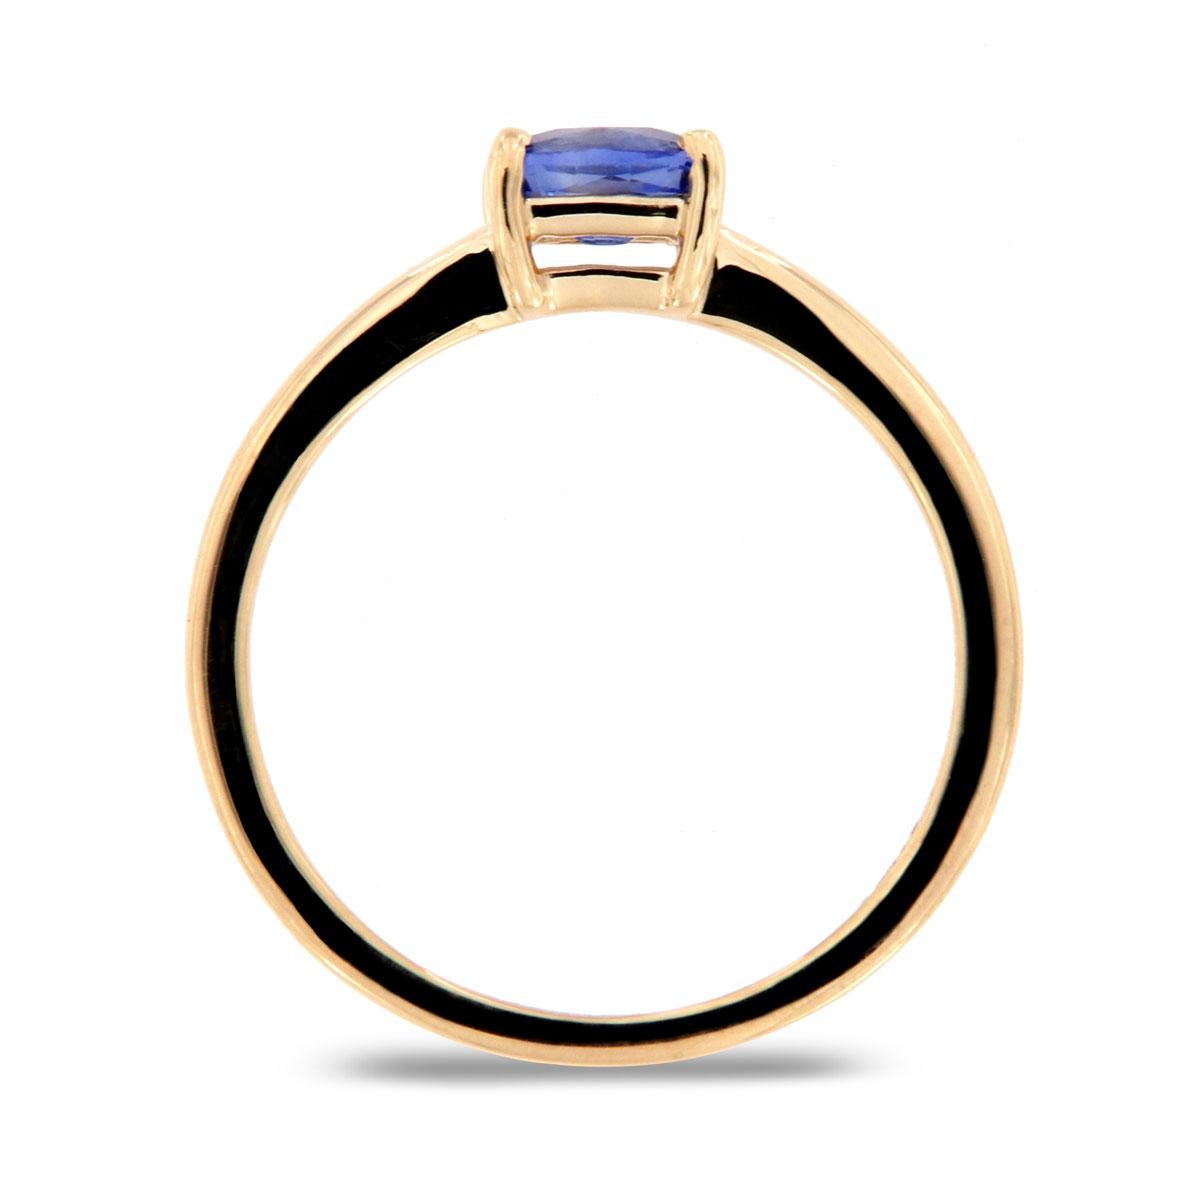 This Petite Solitaire ring features 0.66-carat Elongated Cushion shape light blue Natural Sapphire in a four-prong basket setting. Unheated

Product details: 

Center Gemstone Type: Blue Sapphire
Center Gemstone Carat Weight: 0.66
Center Gemstone